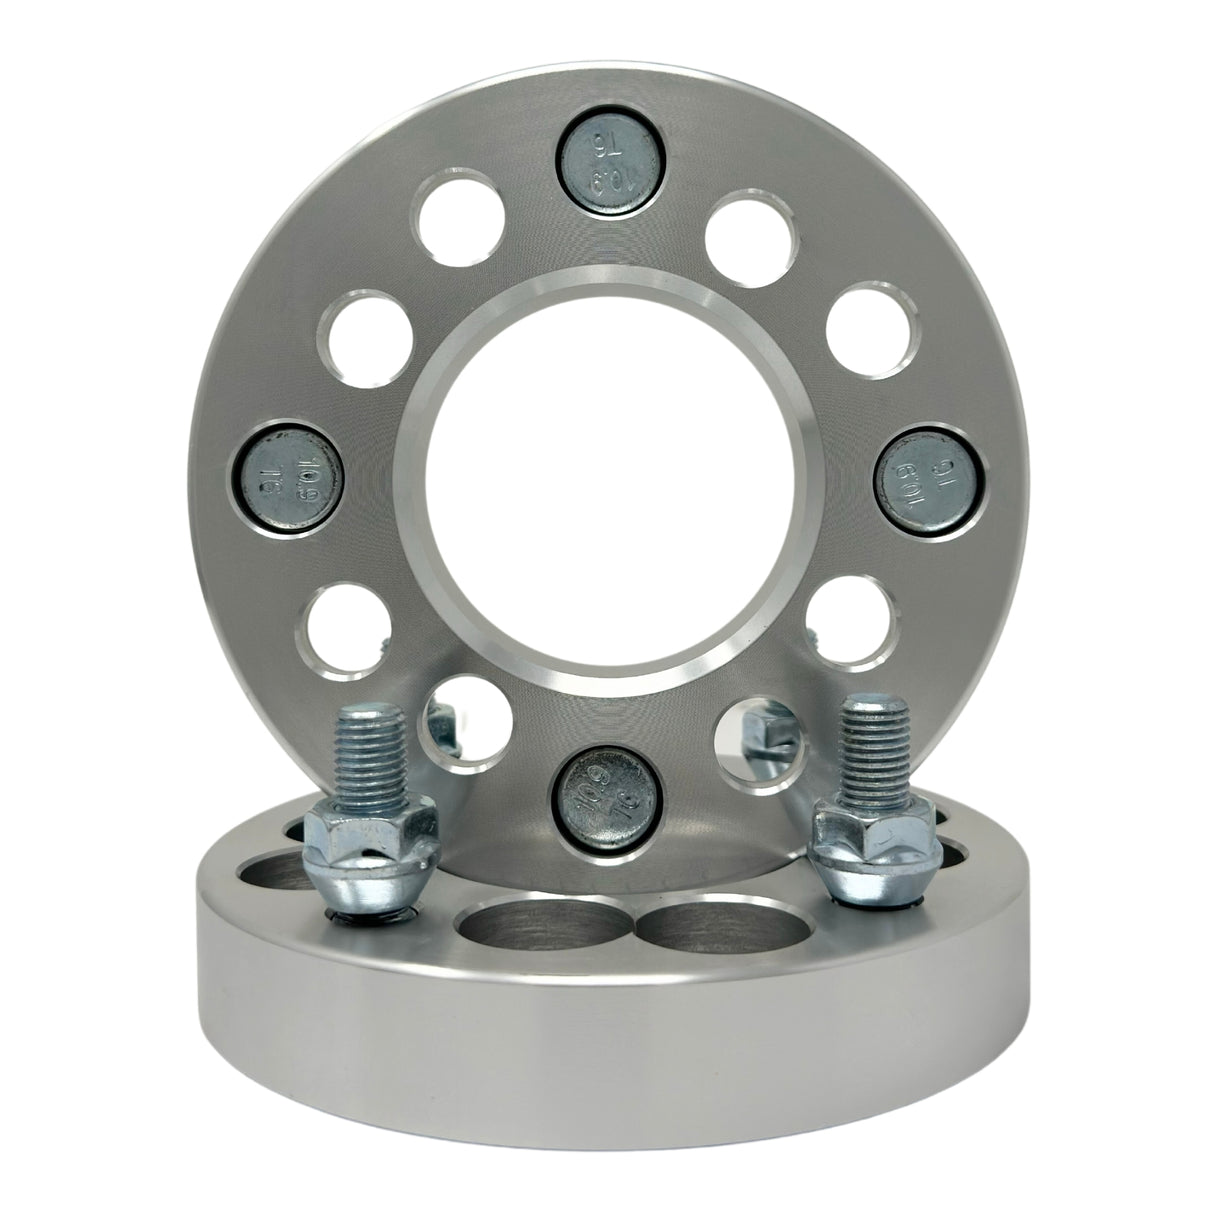 4x100 or 4x4.25 to 4x4.5 Wheel Adapters Universal Kit 1" Inch (25mm) 12x1.5 Studs & Lug Nuts 71mm Center Bore | 4x100 or 4x108 to 4x114.3 spacers